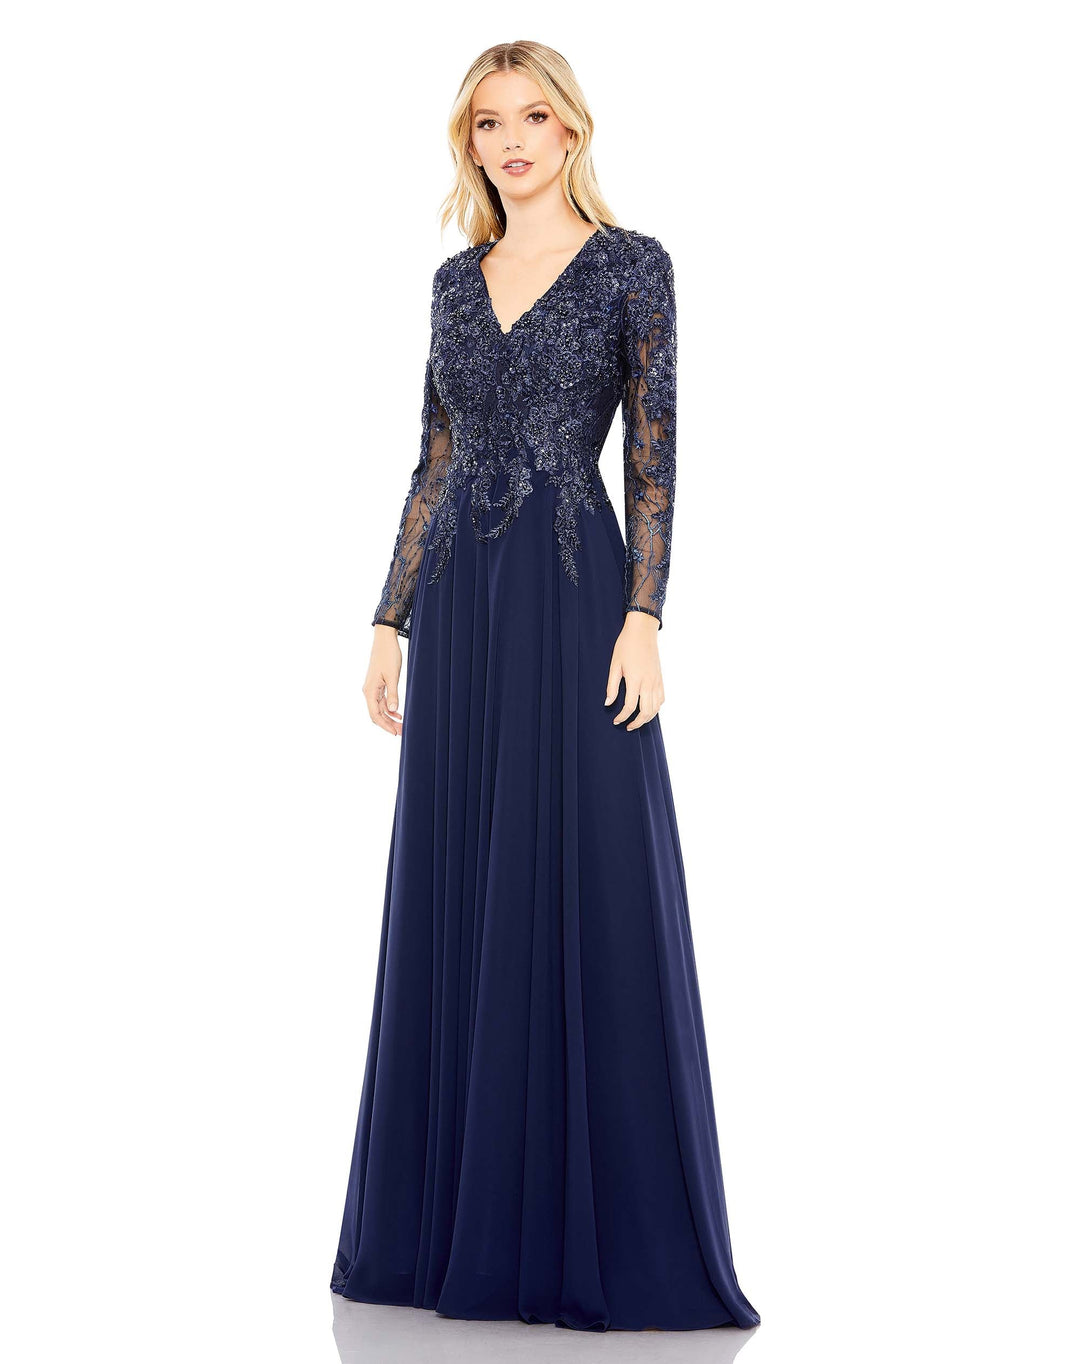 Embroidered Illusion Long Sleeve V Neck Gown - FOSTANI